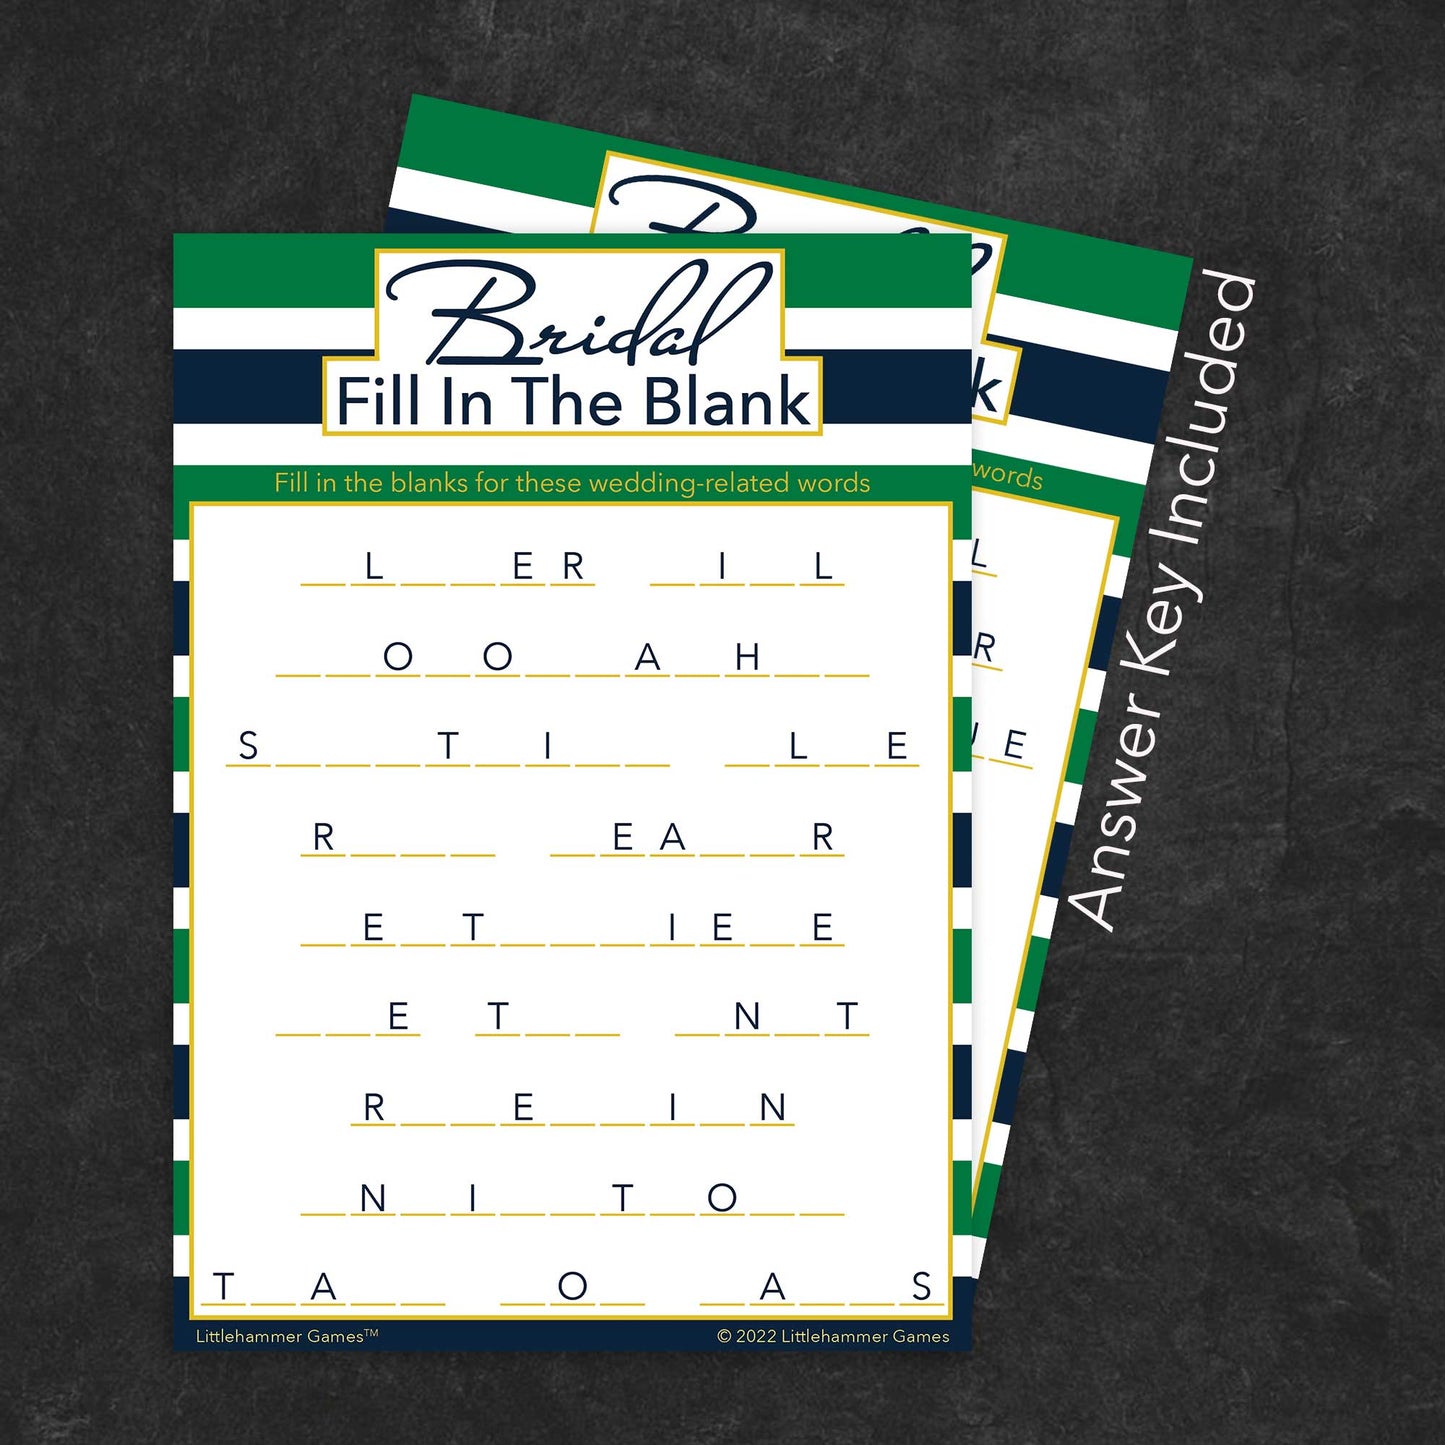 Bridal Fill in the Blank game card with a green and navy-striped background with answer card tucked behind it on a slate background with white text that says "Answer Key Included"